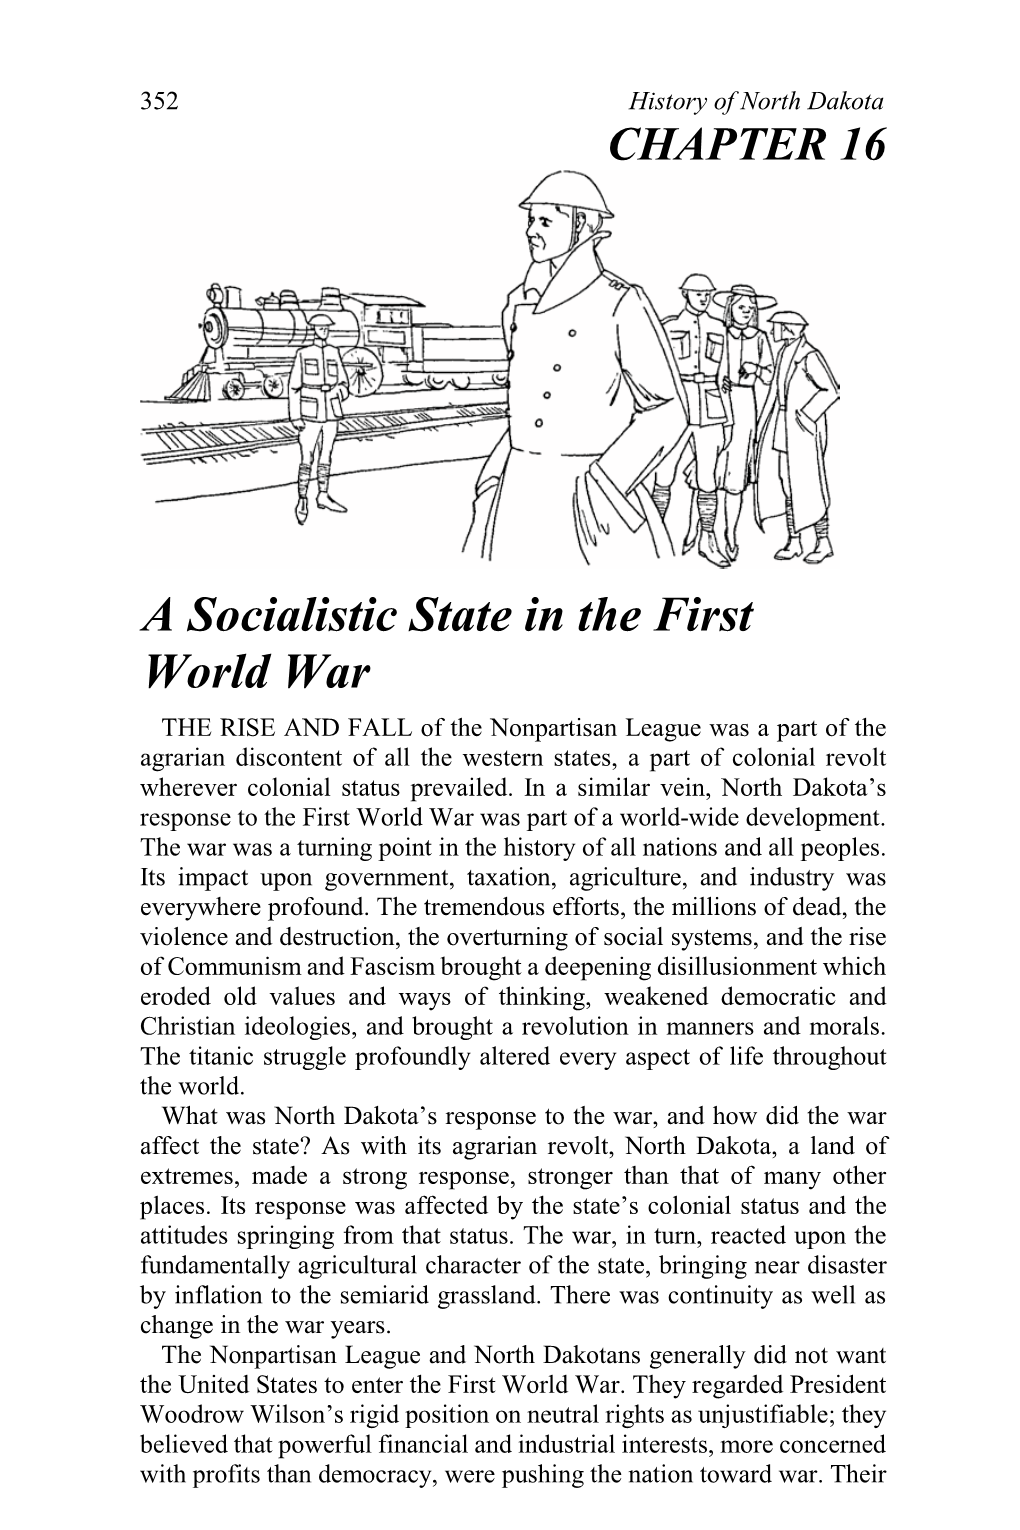 A Socialistic State in the First World